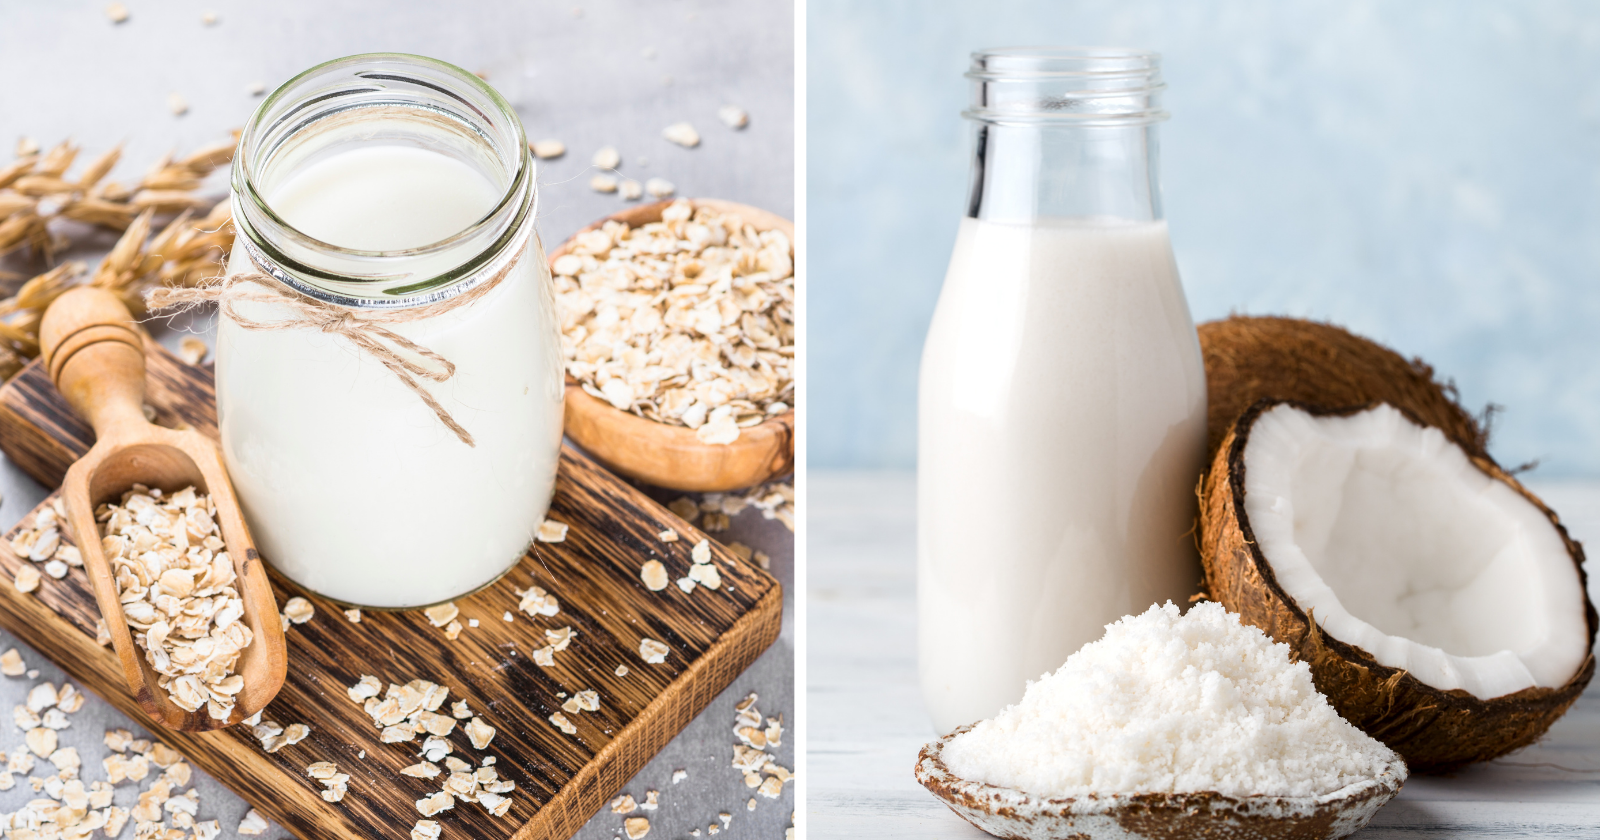 6 easy and delicious recipes to make your own plant-based milk